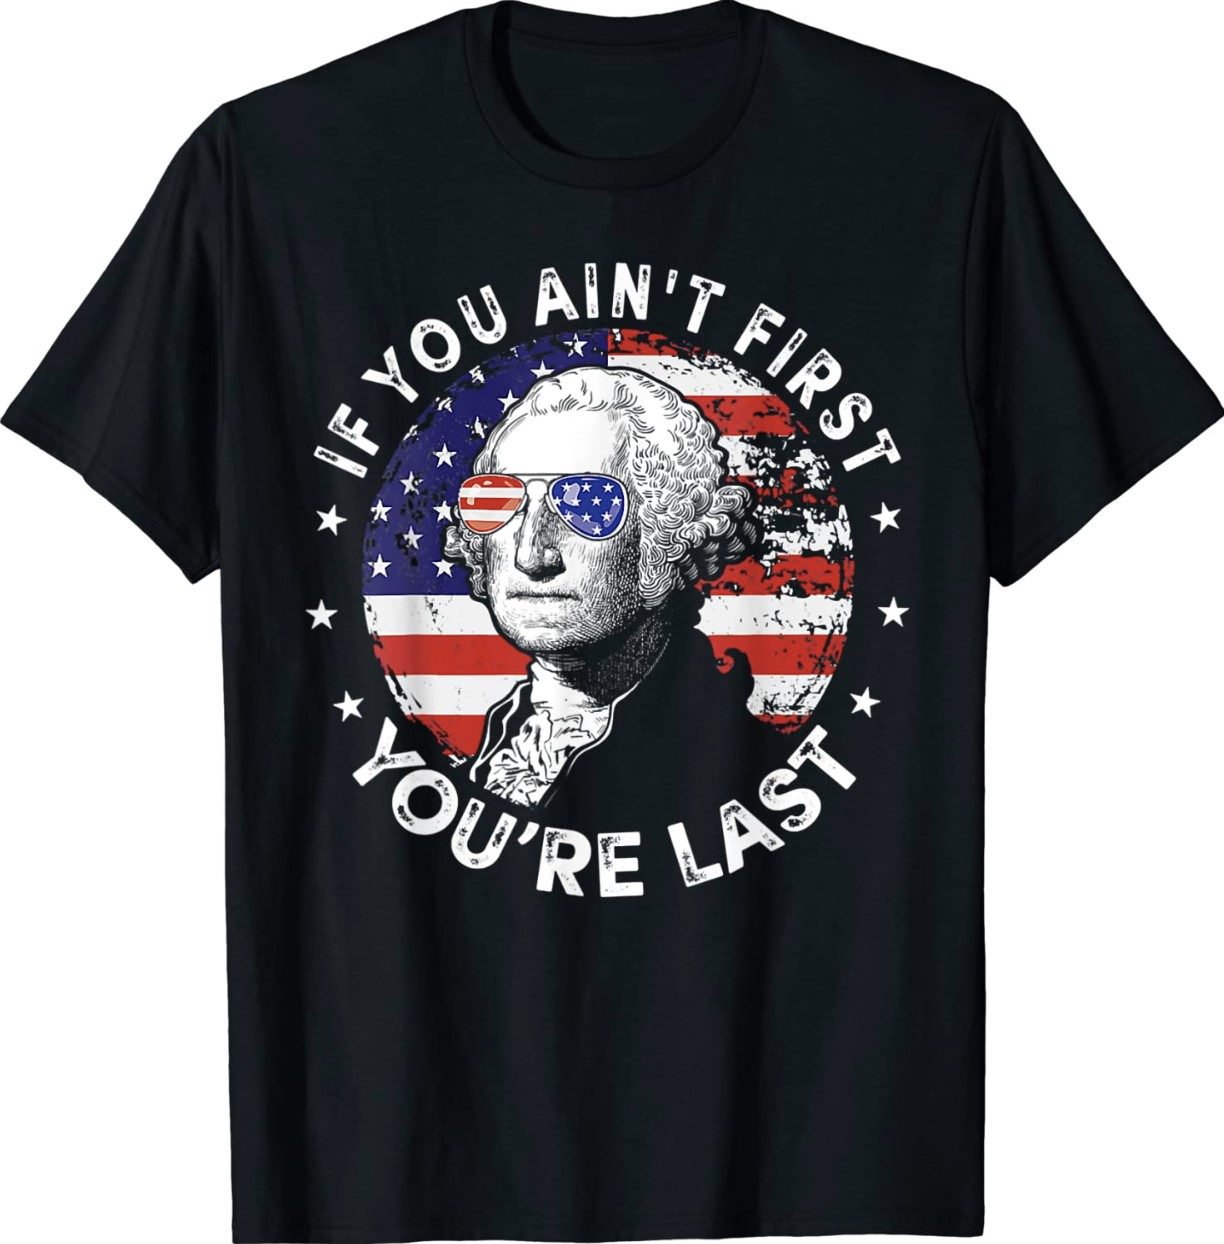 If You Ain't First You're Last Funny 4th of July Shirt - ShirtsMango Office